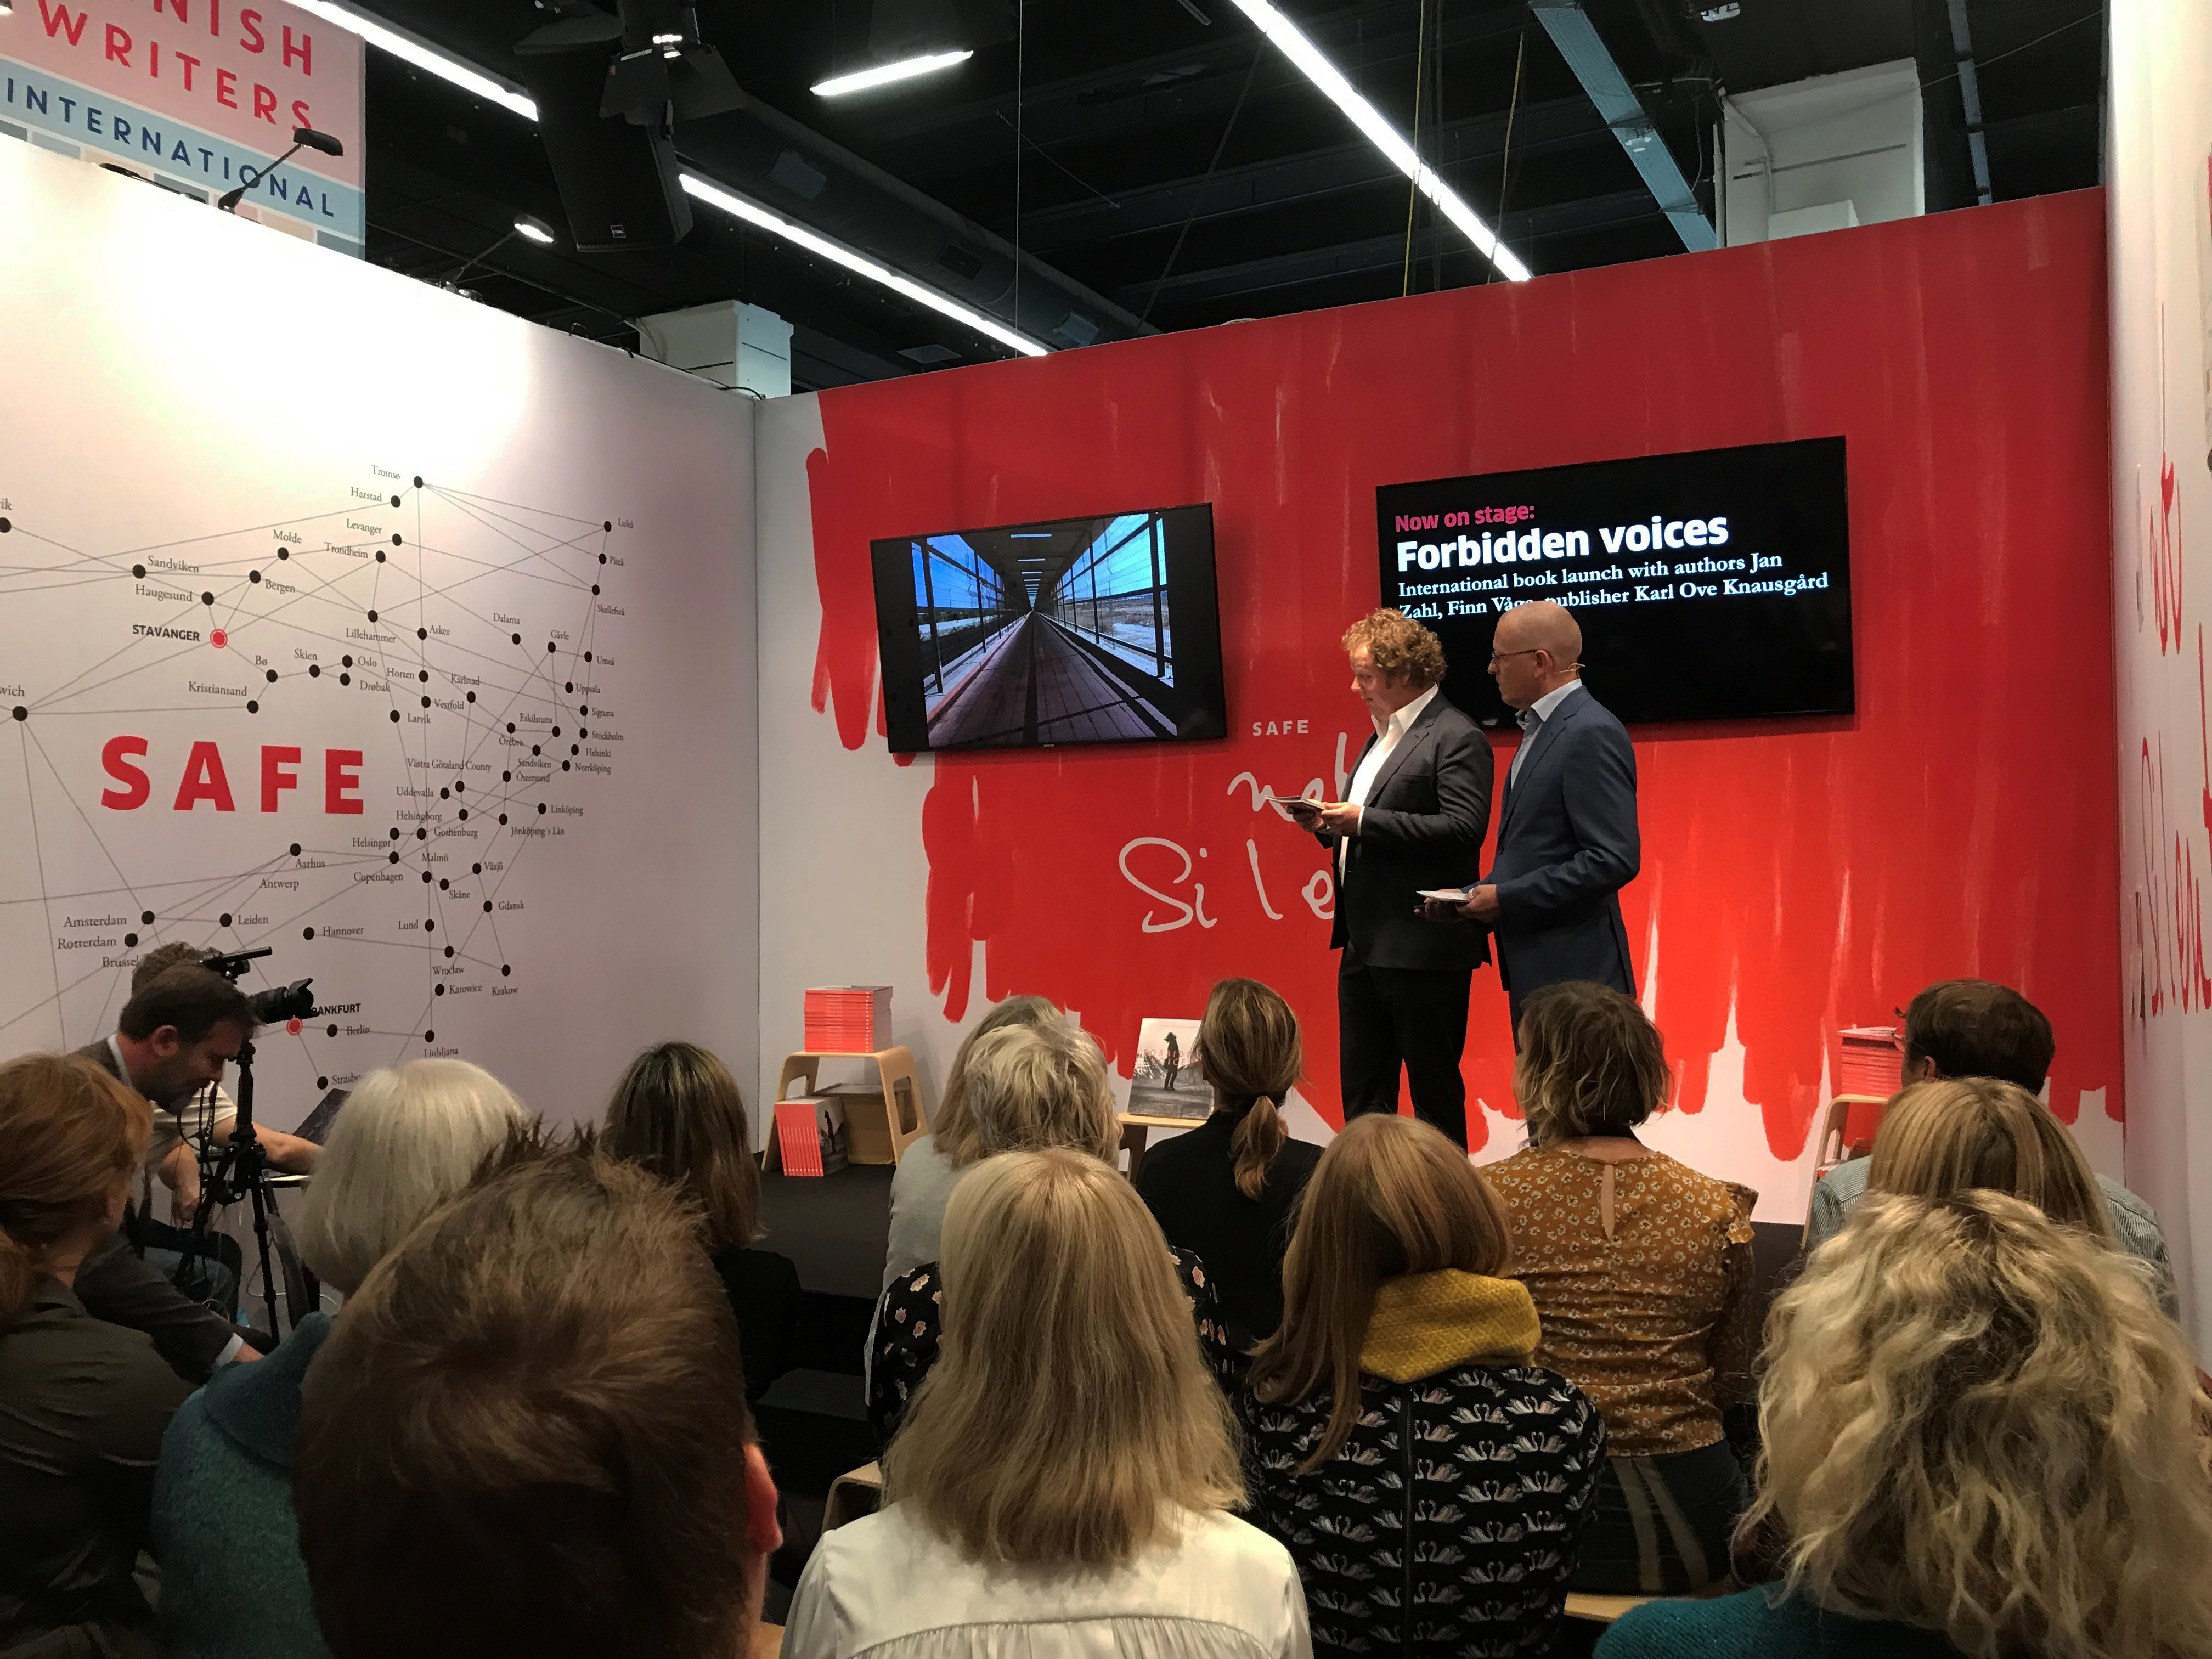 Stavanger Aftenblad's journalists and authors of Forbidden voices, Jan Zahl and Finn E. Våga, presents the project to the audience during the booklaunch at ICORN's stand at the Frankfurt Book Fair 2019. Photo.